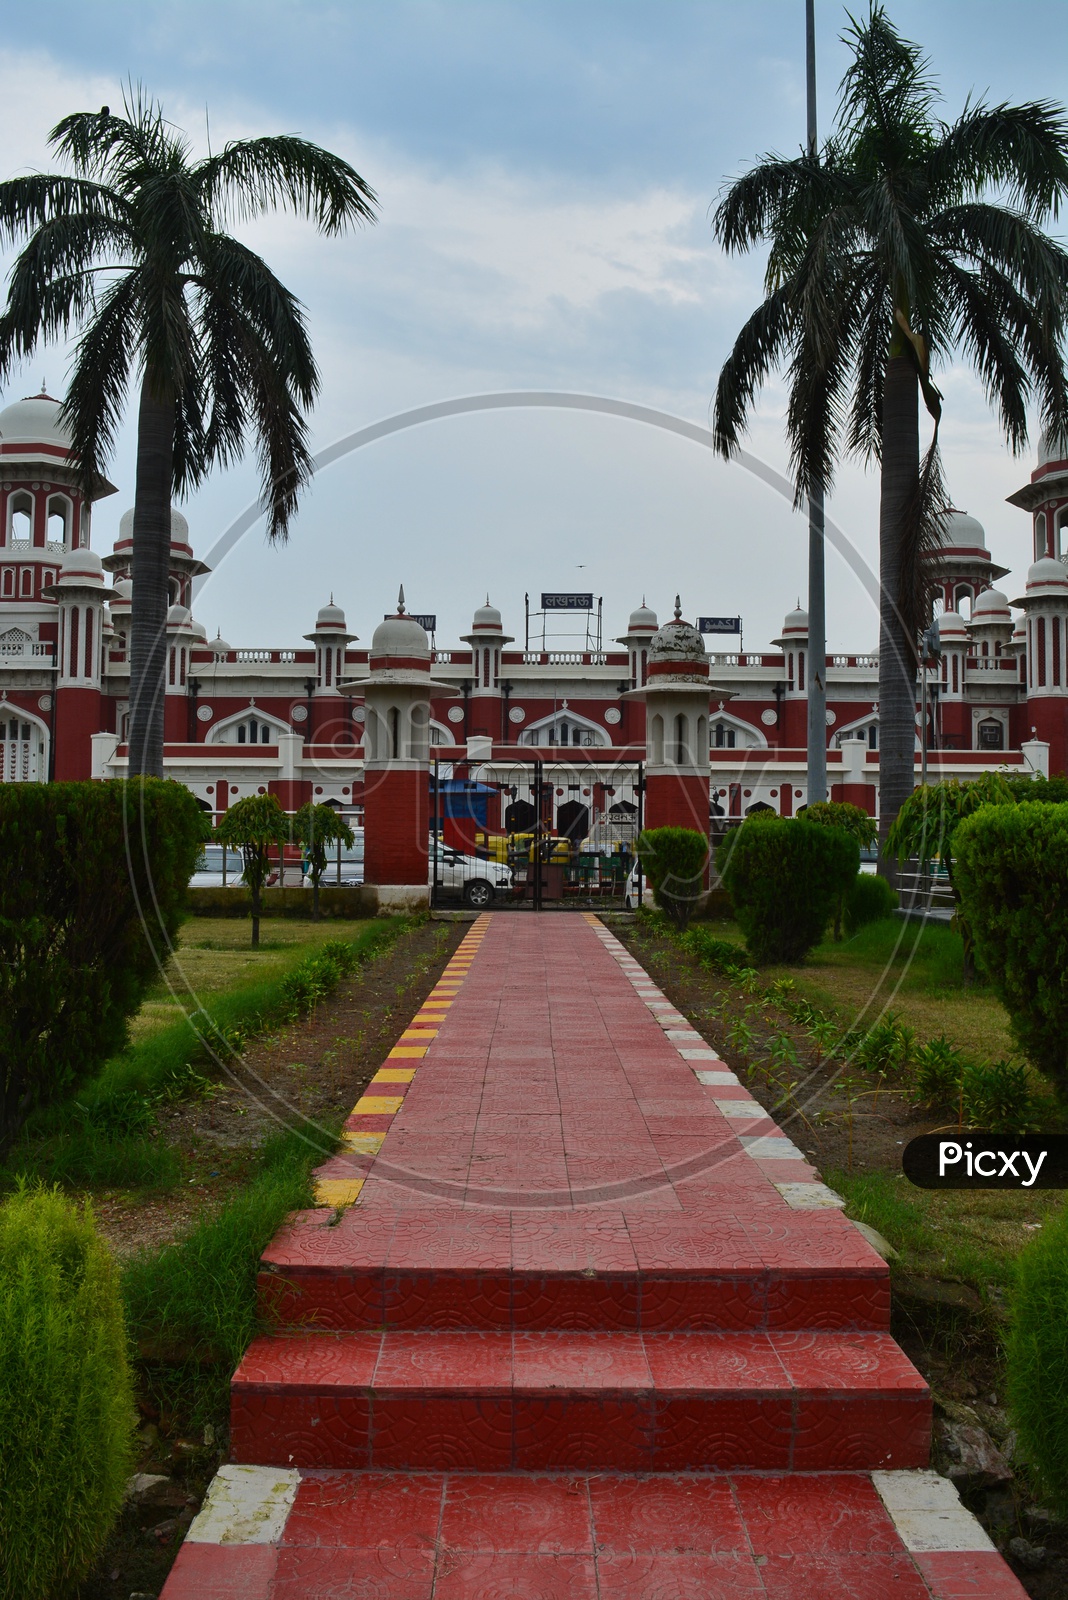 Lucknow Charbagh Railway Station